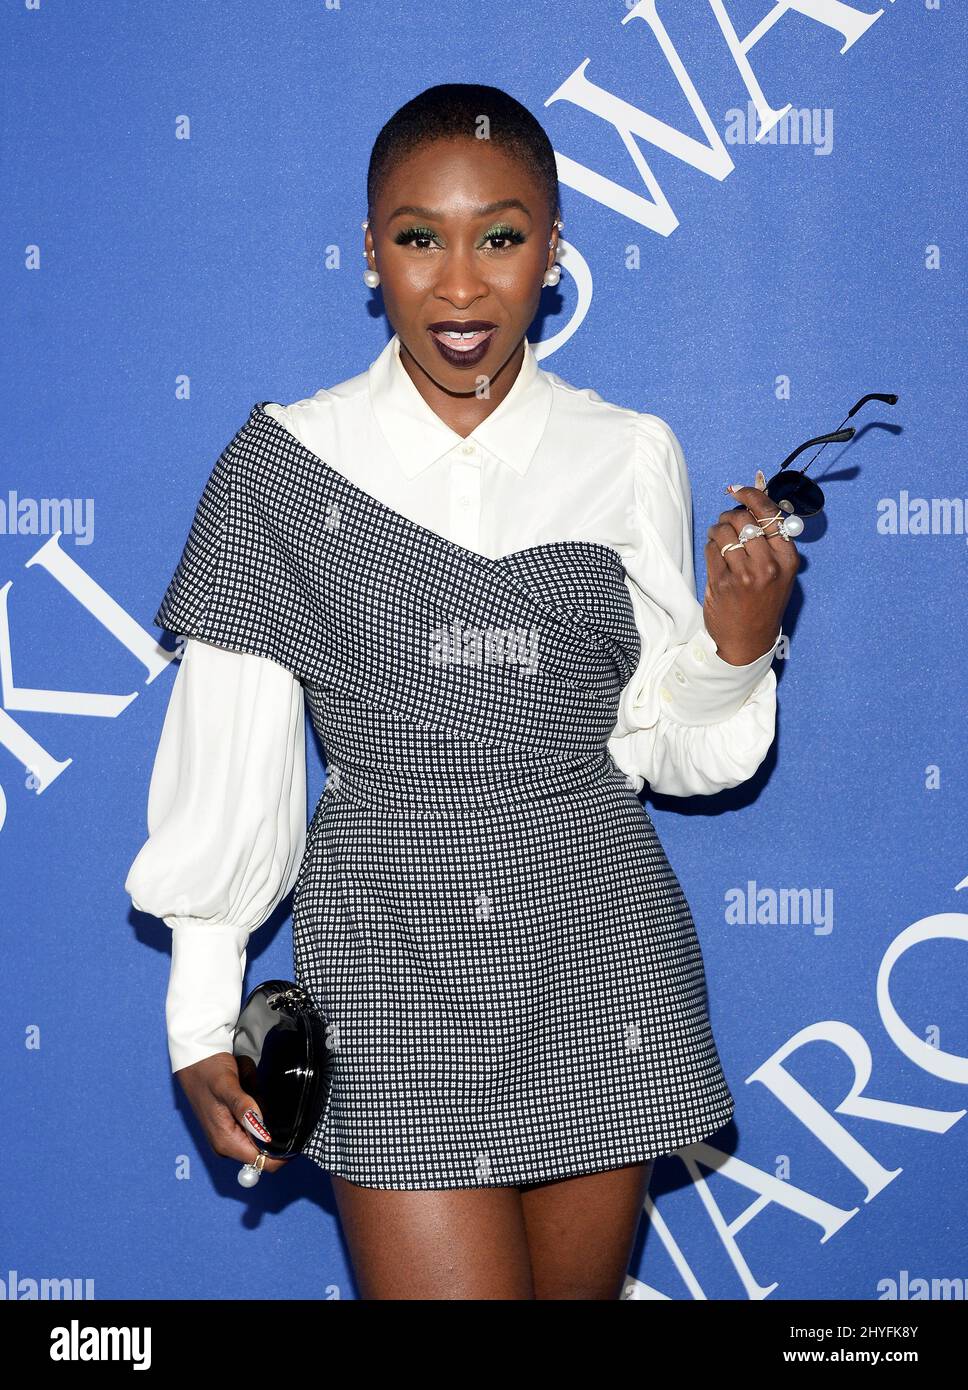 Cynthia Erivo at the 2018 CFDA Fashion Awards held at the Brooklyn Museum on June 4, 2018 in Brooklyn, NY Stock Photo